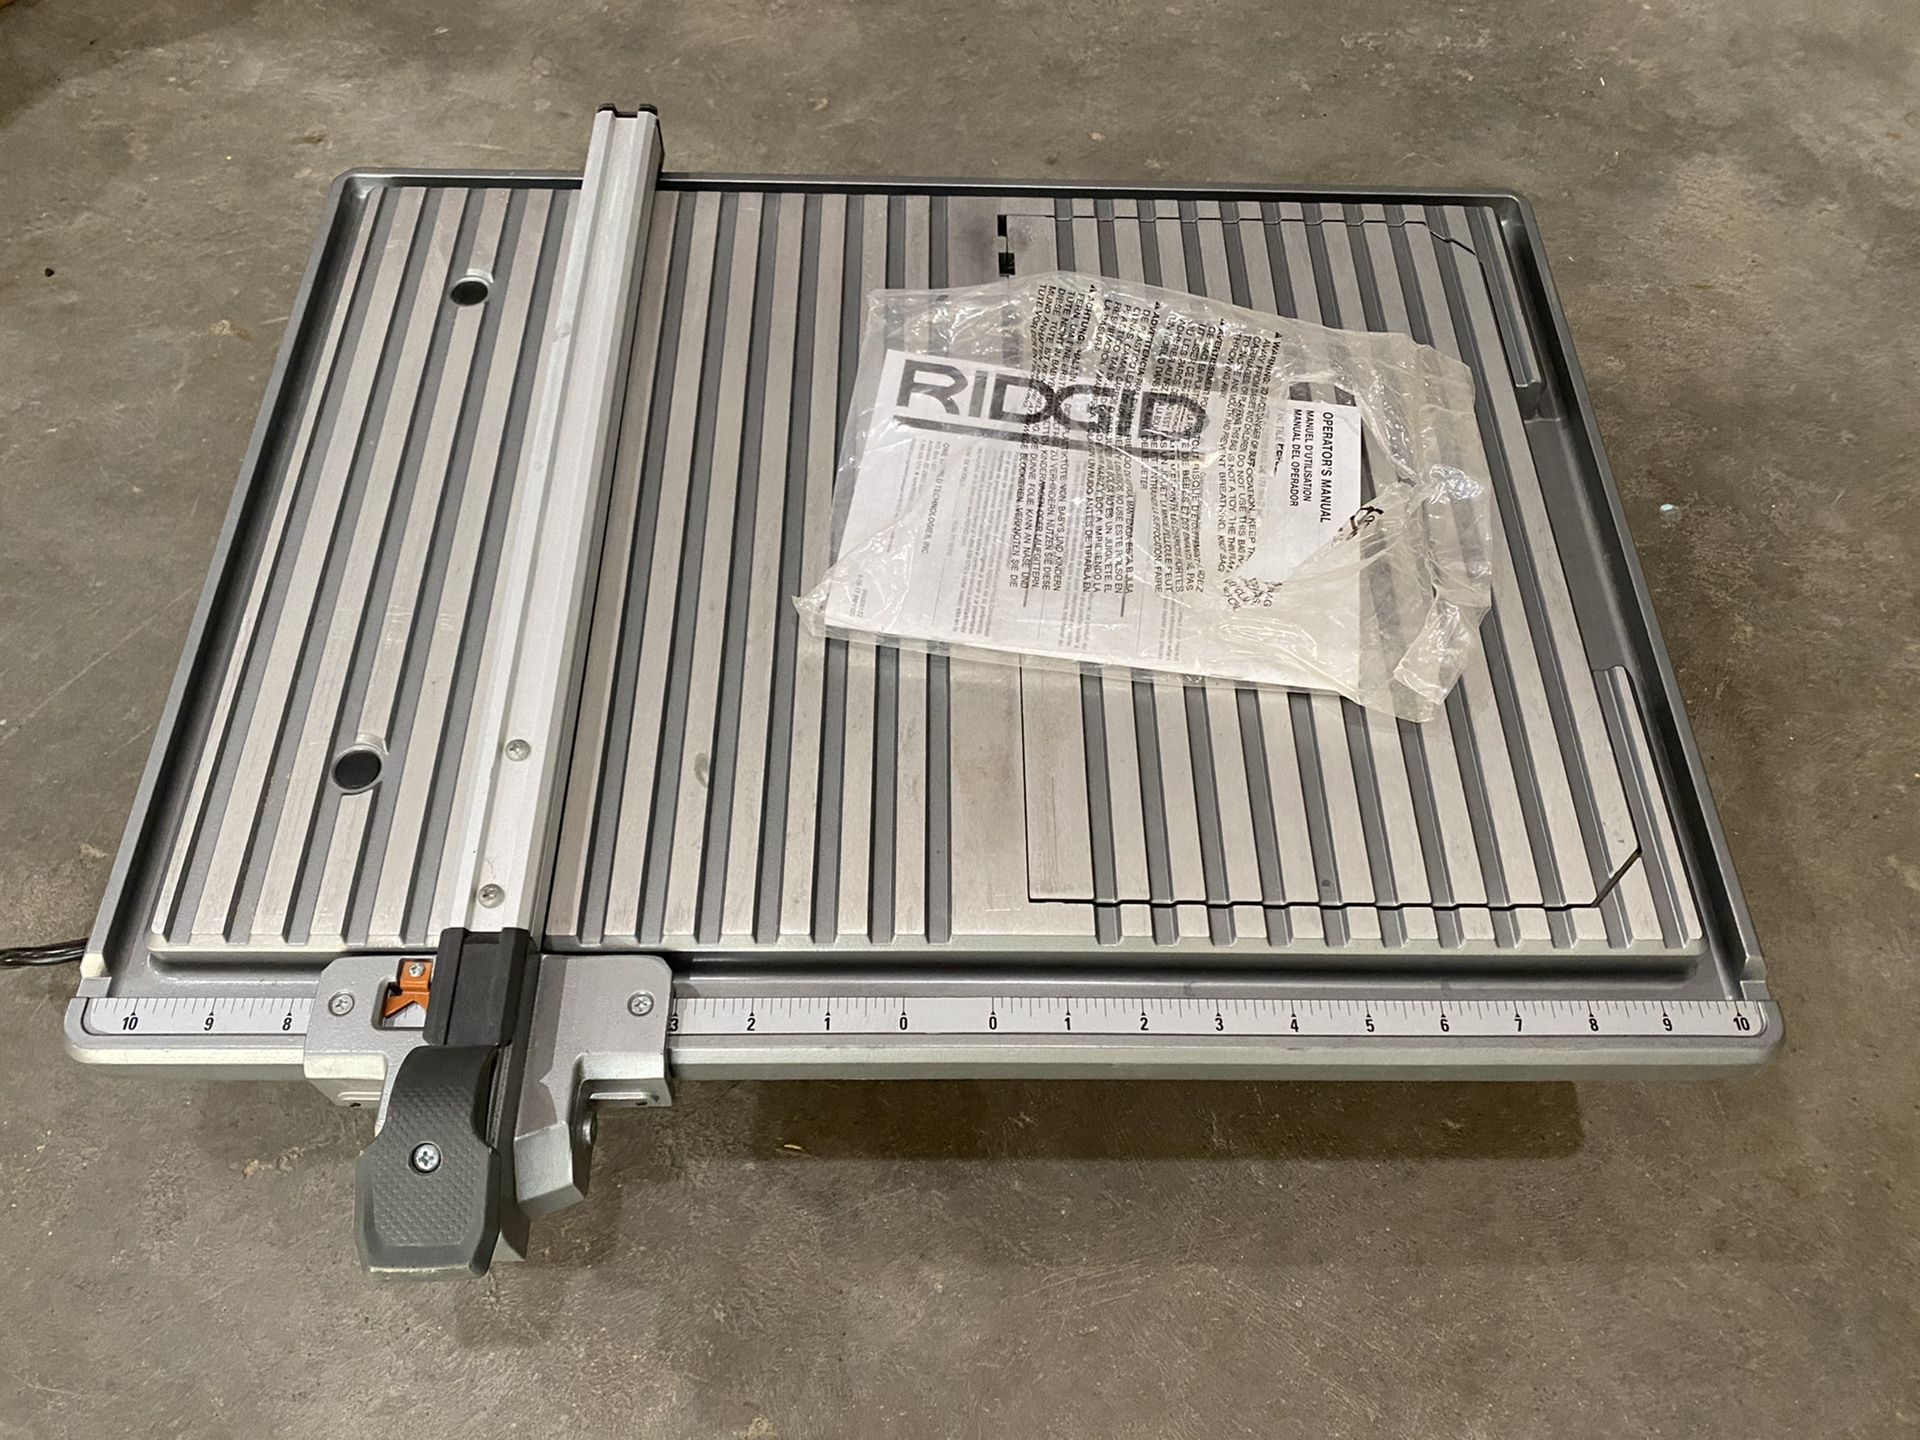 Tile Saw - New, never used